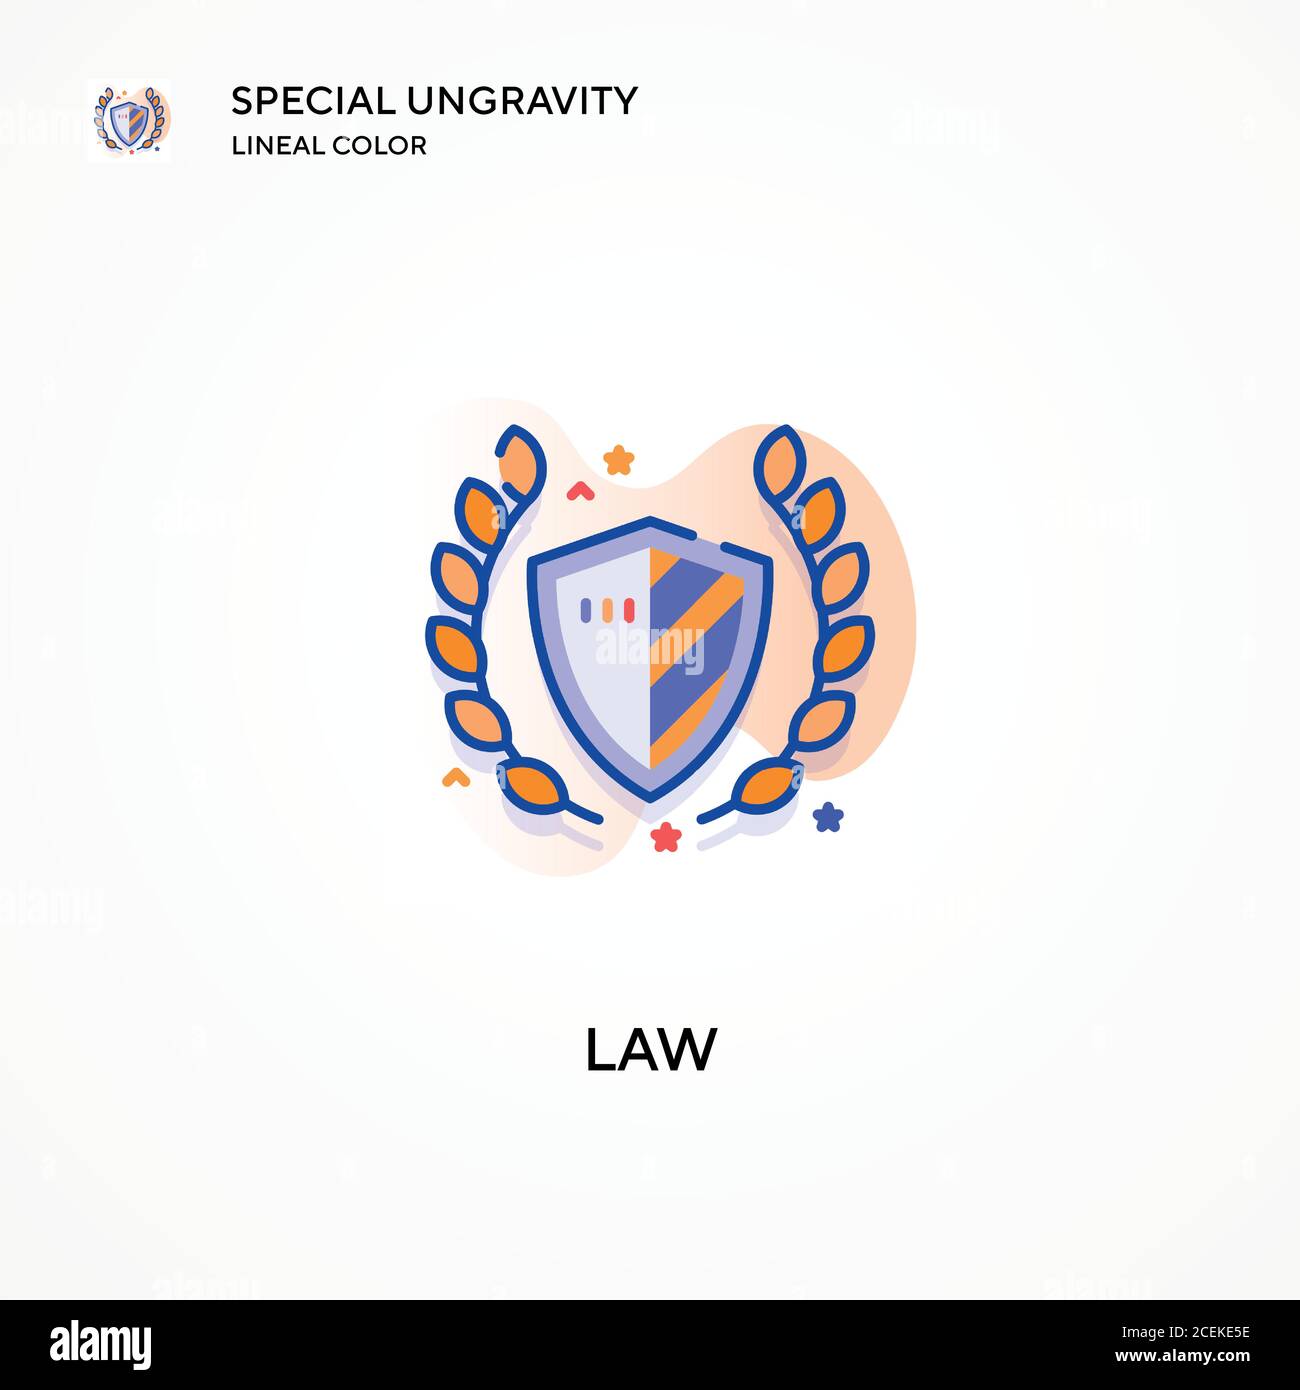 Law special ungravity lineal color icon. Modern vector illustration concepts. Easy to edit and customize. Stock Vector